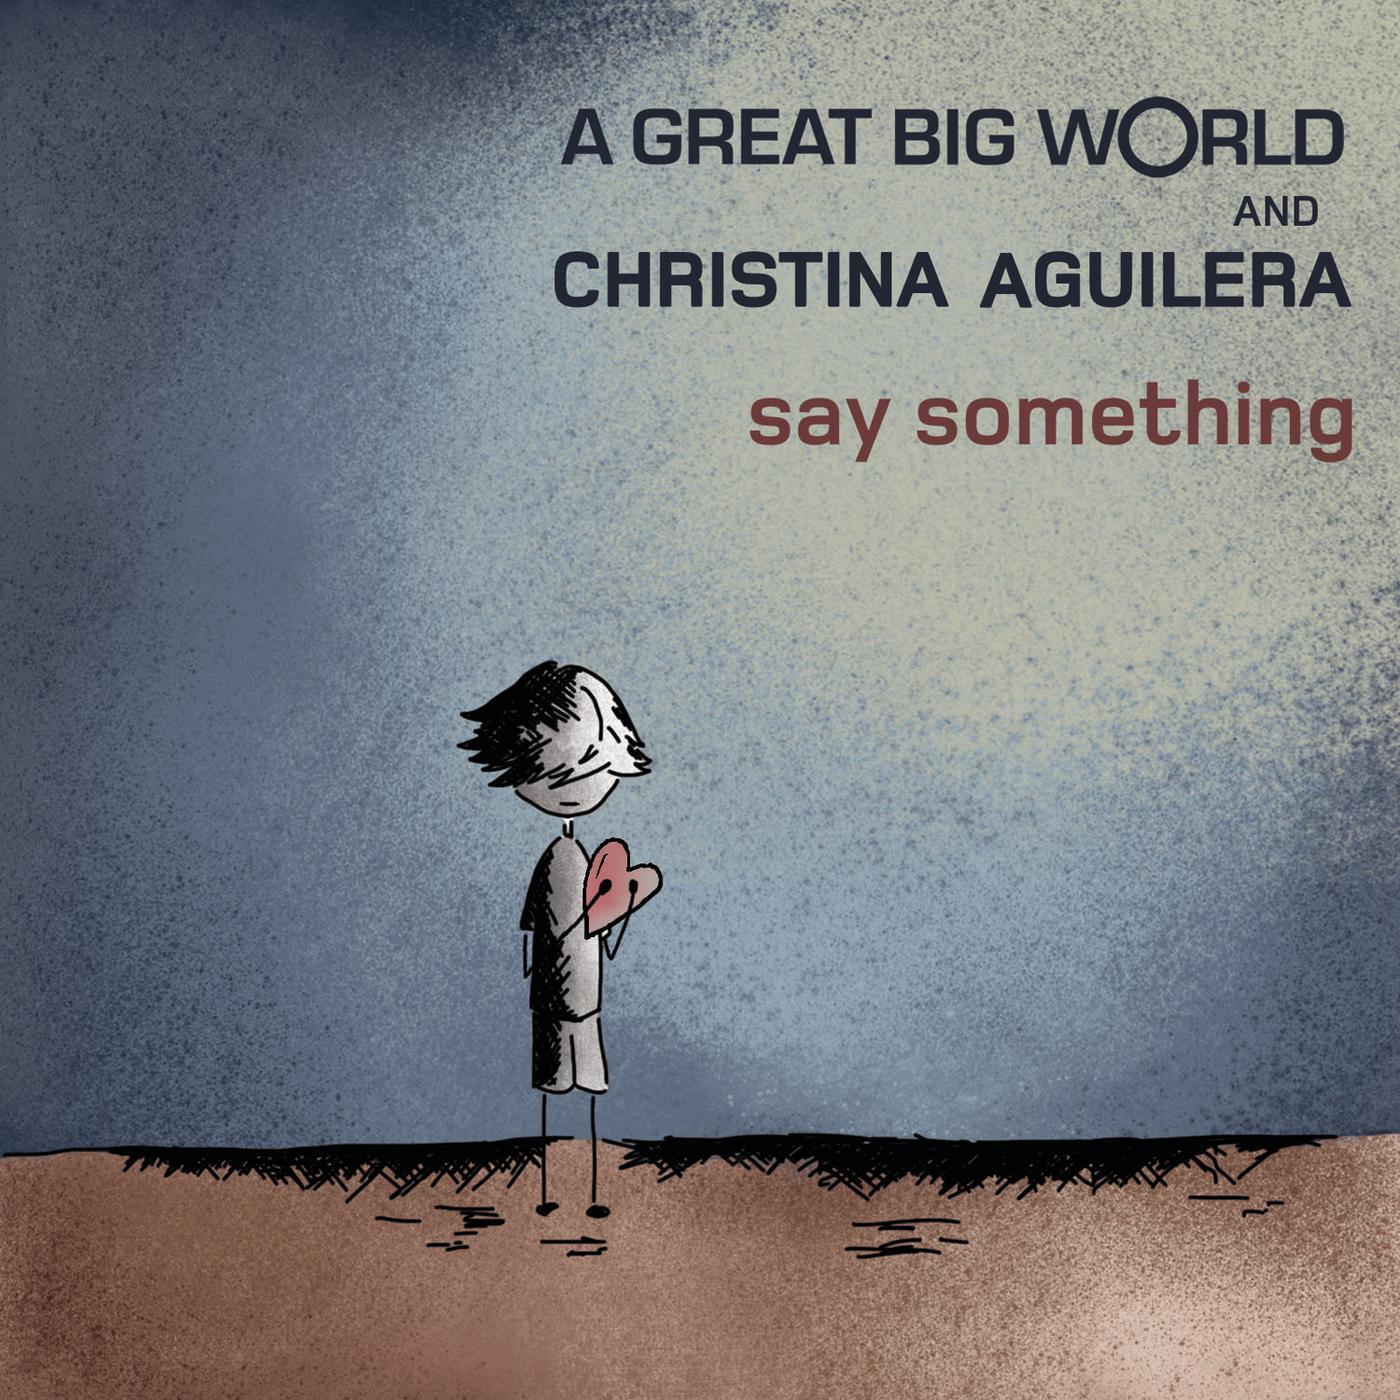 A world of something. Say something!. A great big World say something. A great big World Christina Aguilera.